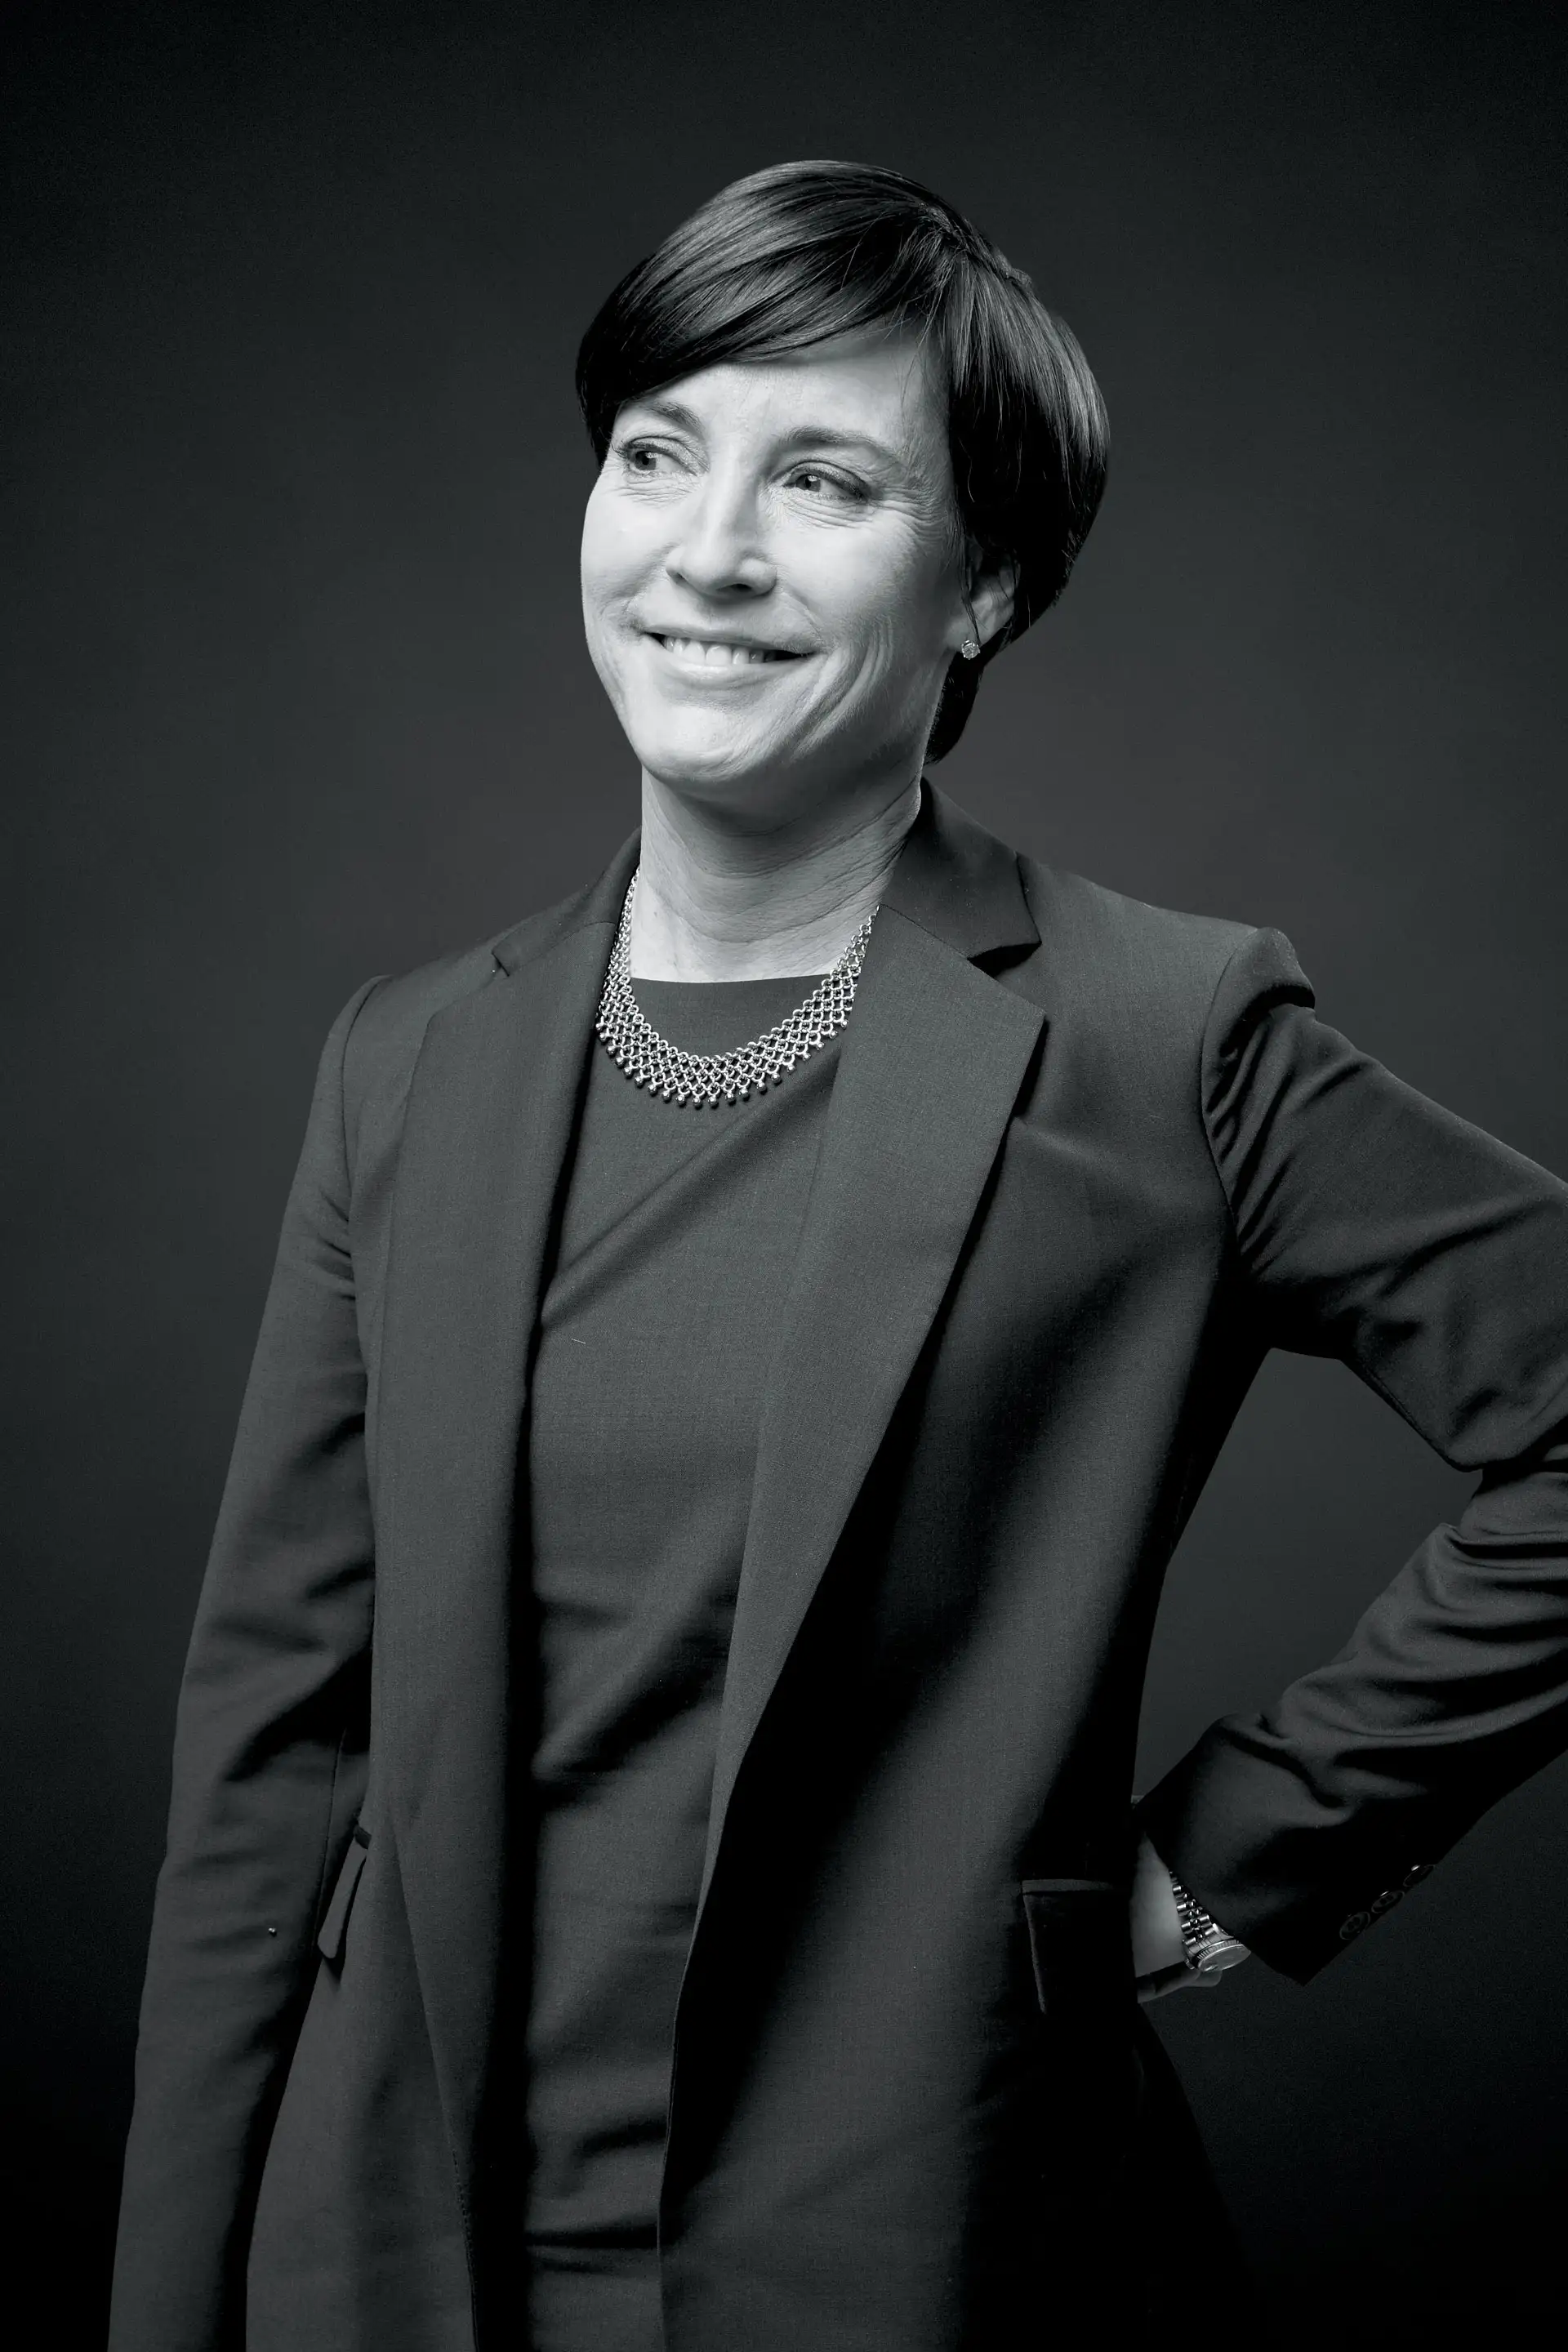 Sarah Ketterer, Chief executive officer and portfolio manager for Causeway Capital